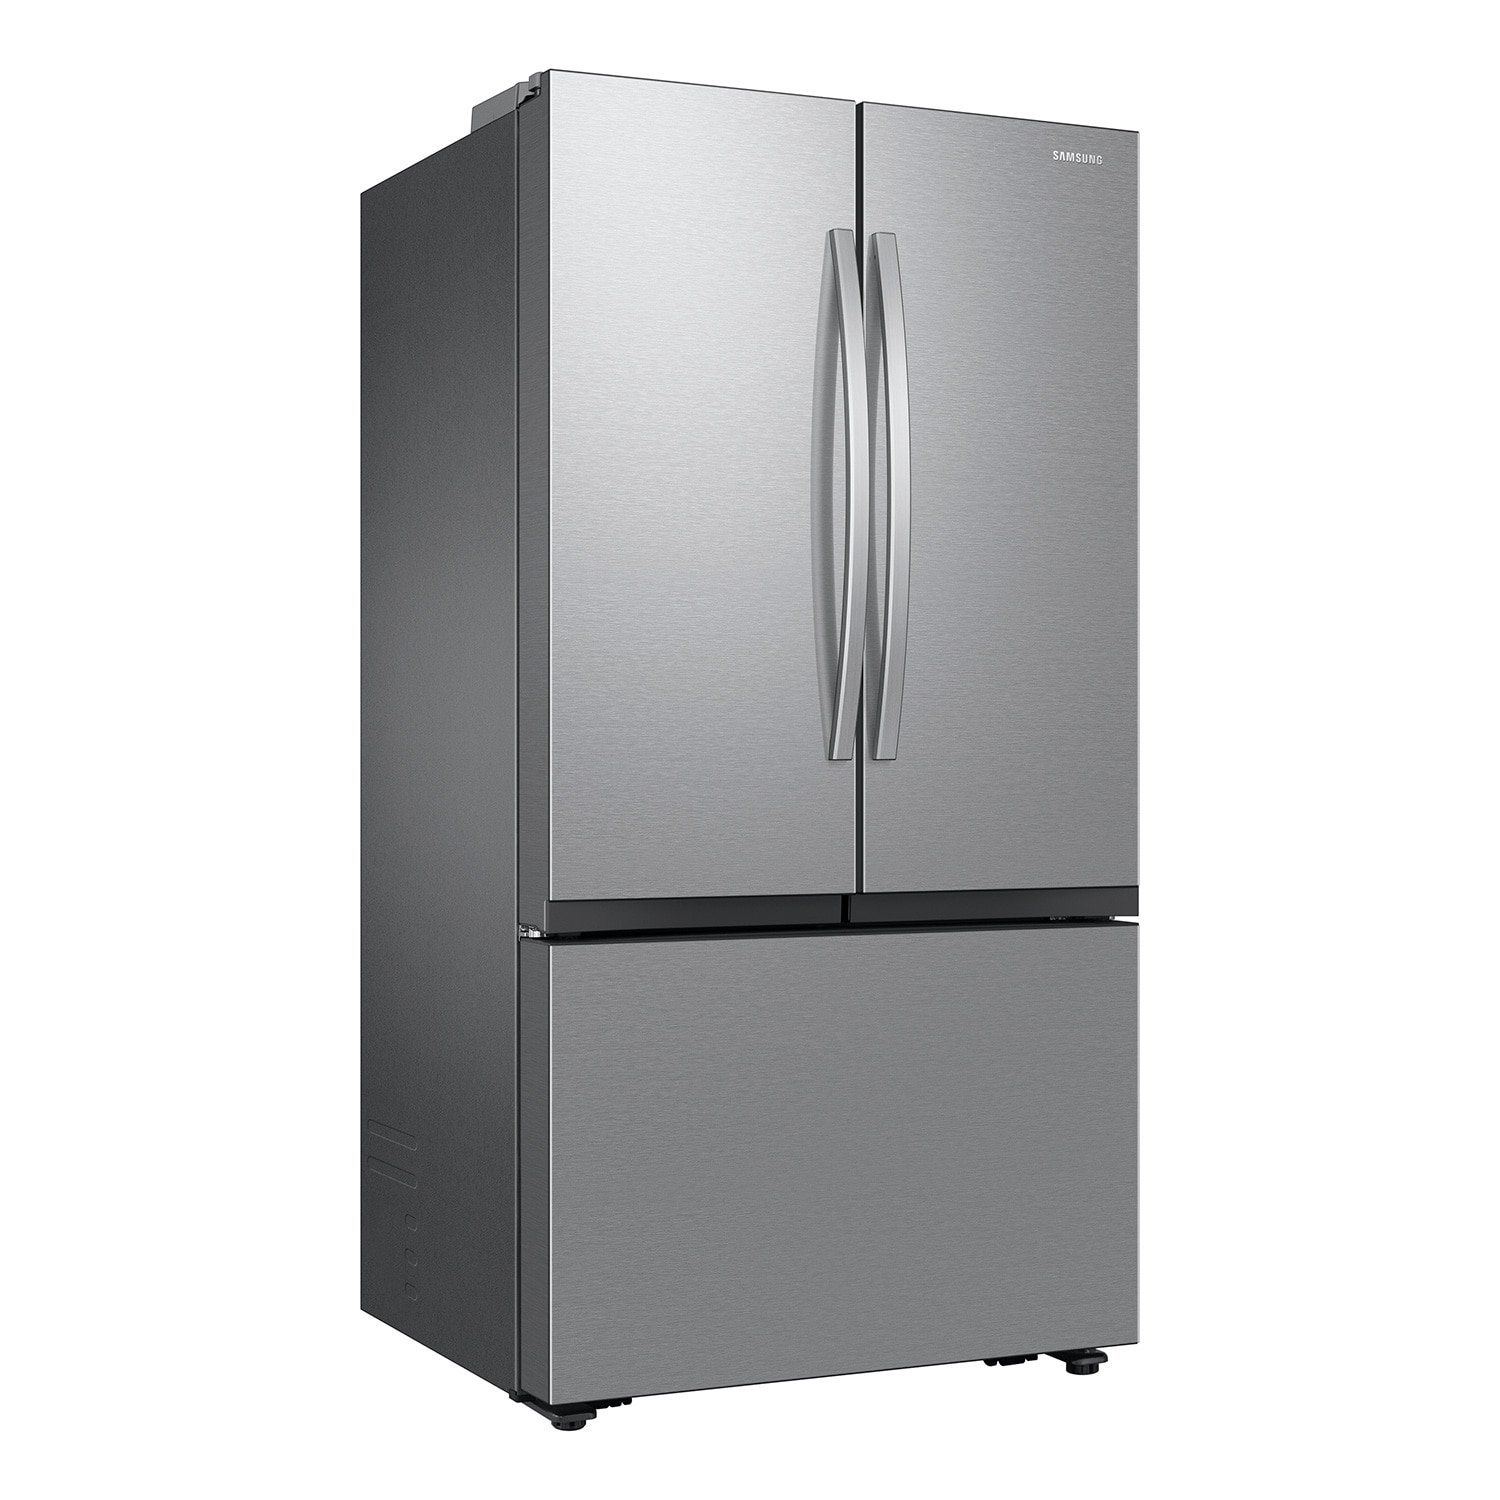 Samsung Mega Capacity 26.5-cu ft Counter-depth Smart French Door  Refrigerator with Dual Ice Maker (Fingerprint Resistant Stainless Steel)  ENERGY STAR